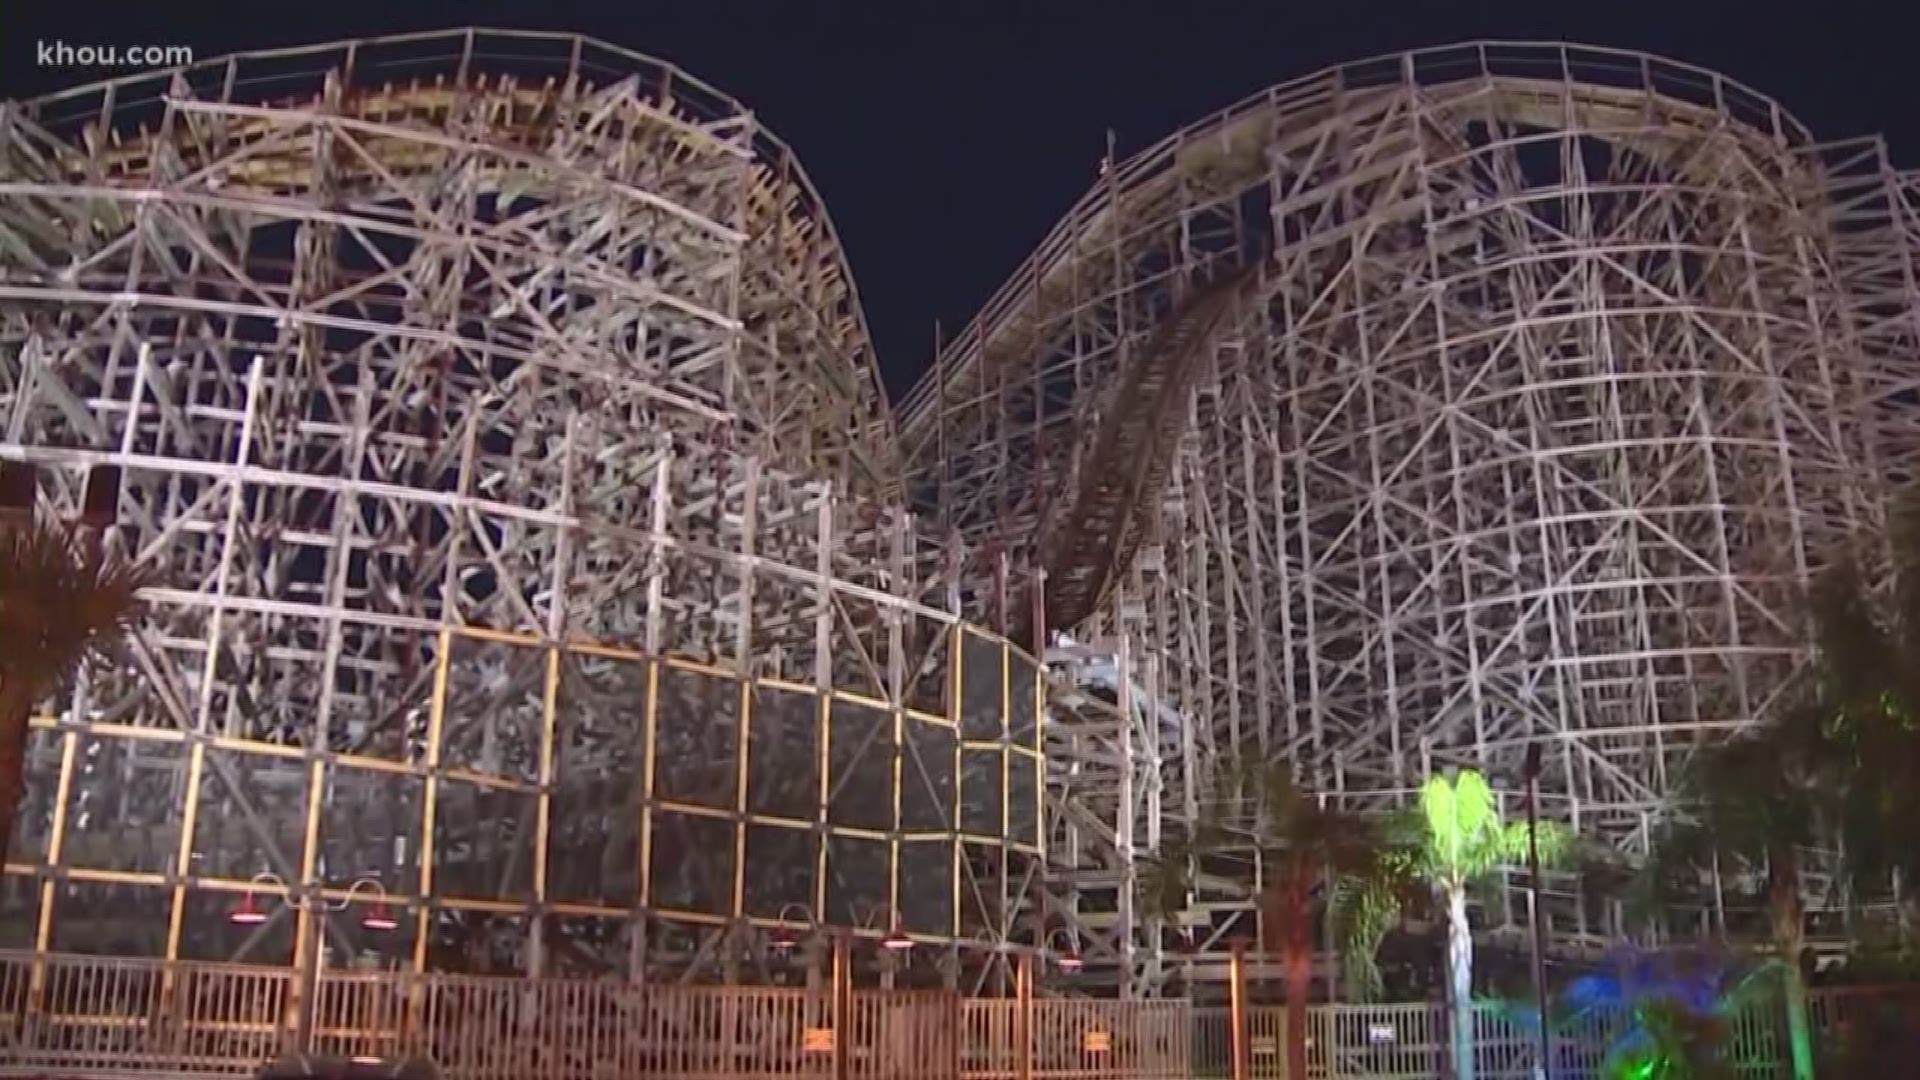 A mother and daughter who rode the Boardwalk Bullet in Kemah got the scare they wasn't expecting when the daughter almost slipped out of the ride. A camera captured the moment the little girl was slipping.